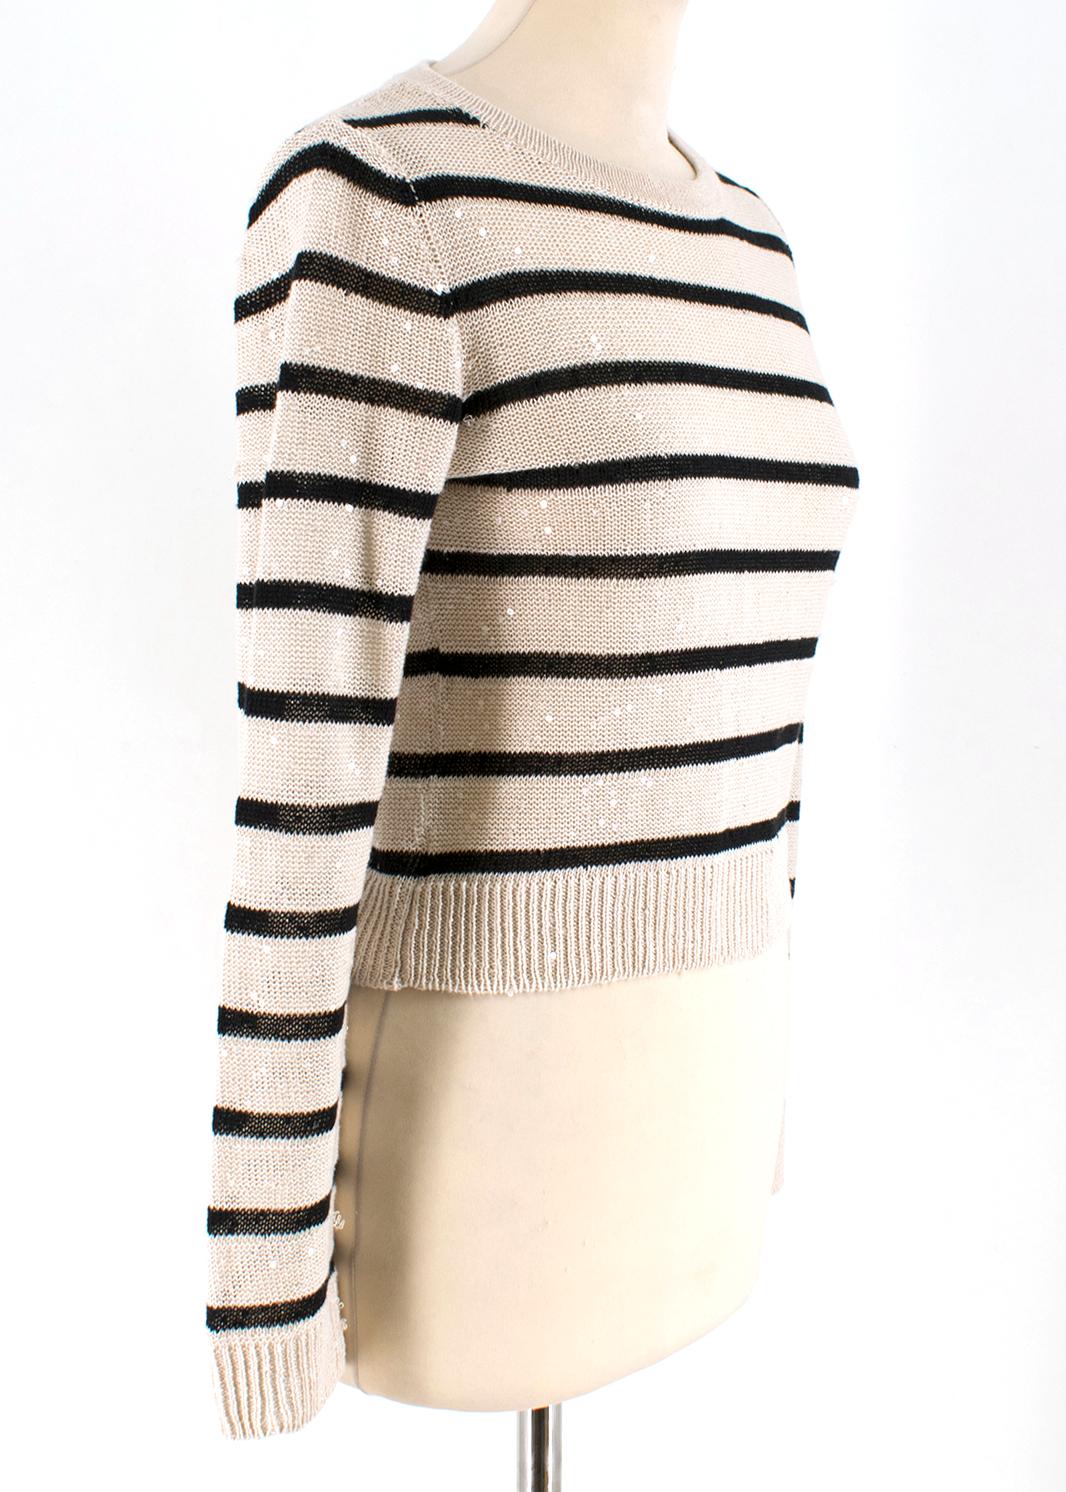 Brunello Cucinelli Striped Embellished Linen Knit Top

- Beige and Black knit short
- Long sleeve
- Lightweight
- Clear sequin embellished
- Round neck 

Please note, these items are pre-owned and may show some signs of storage, even when unworn and